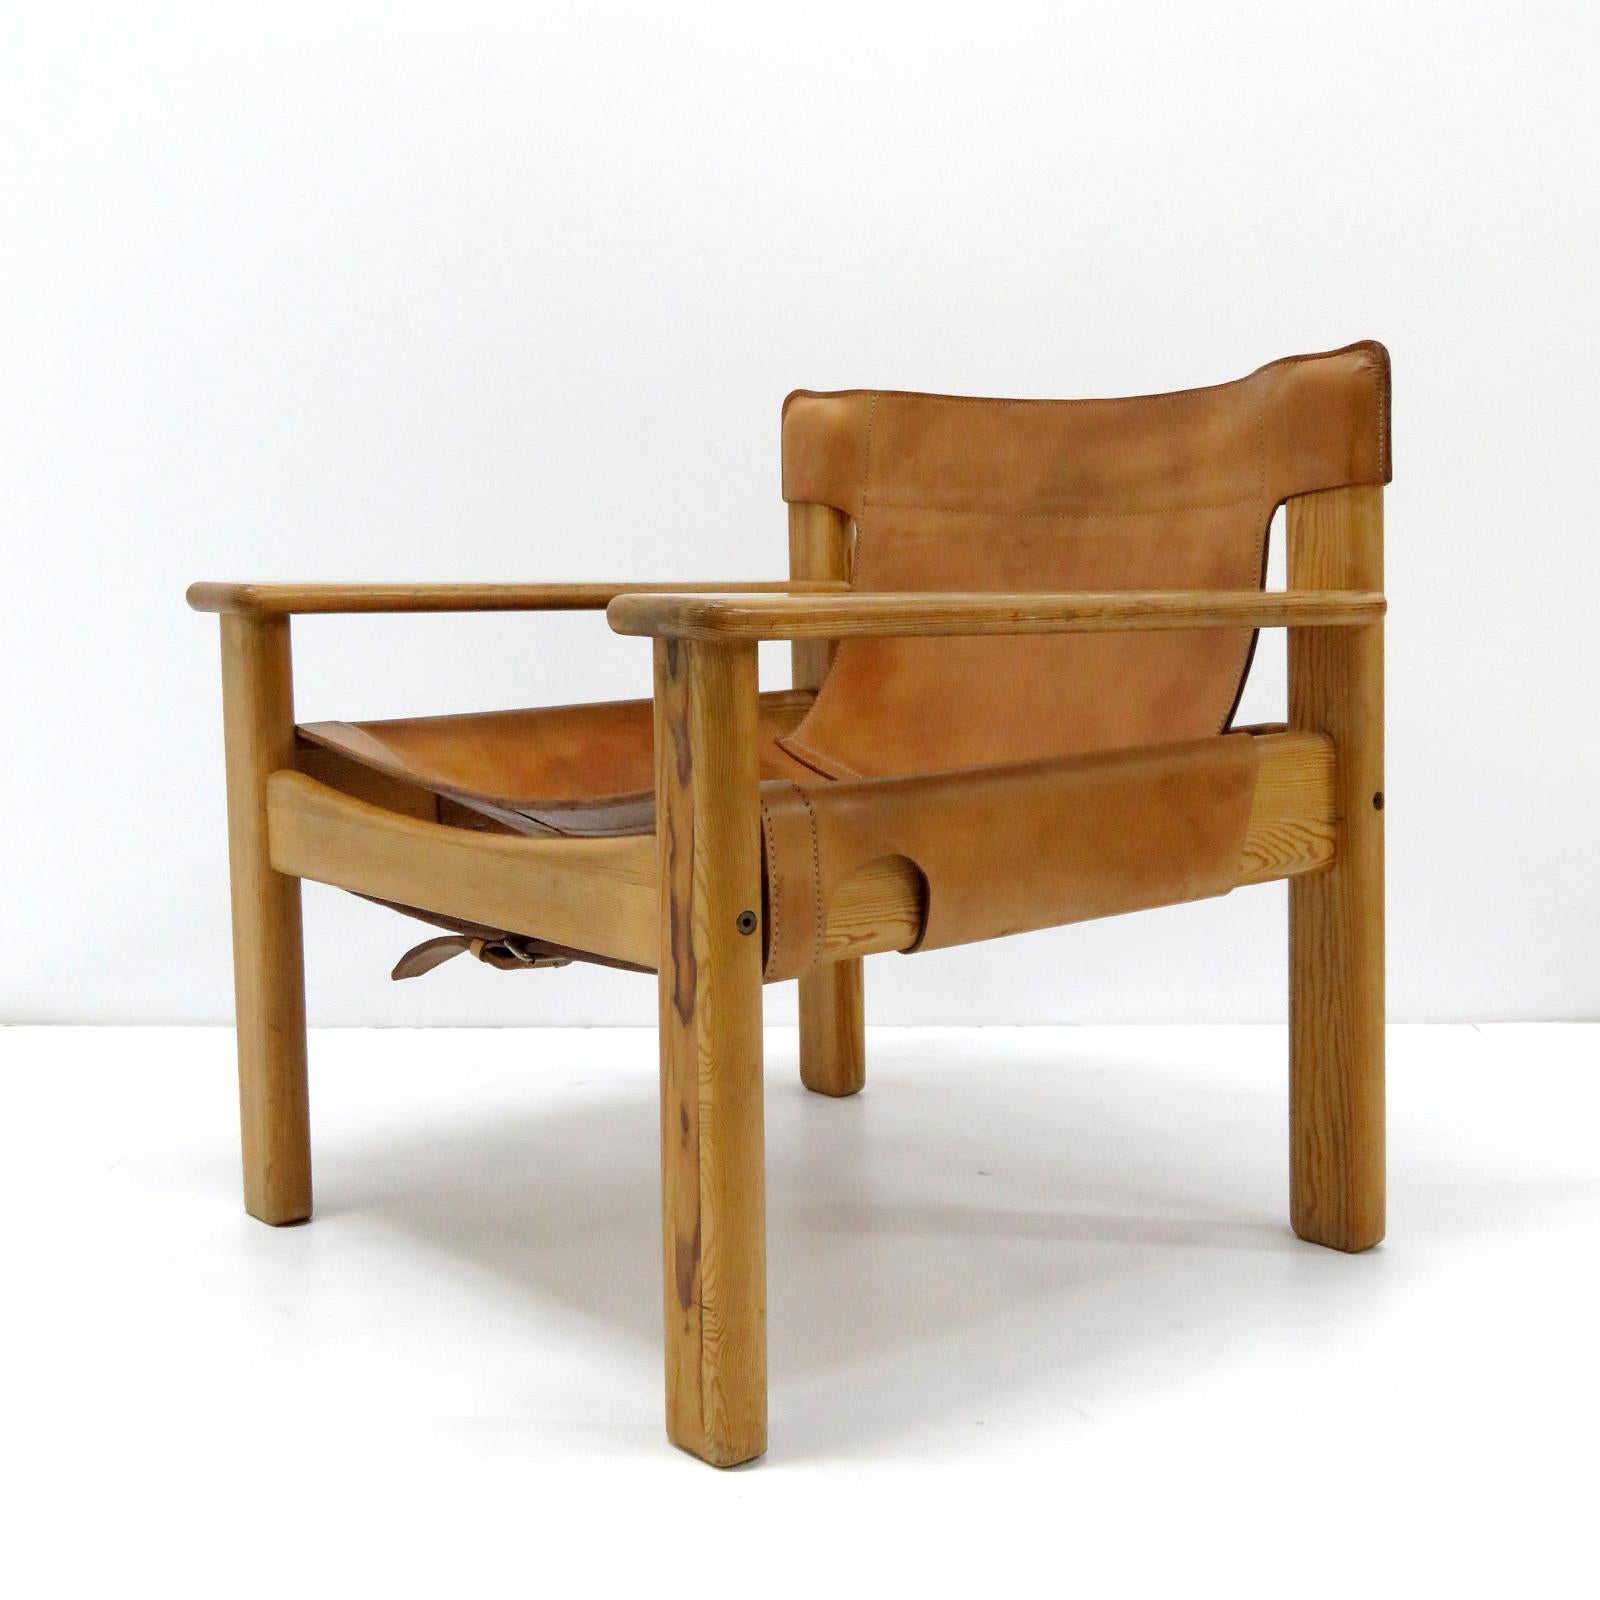 Bold and comfortable Danish modern lounge chairs by Karin Mobring, Sweden, designed in 1977, oversized pine frame with thick cognac colored leather with incredible patina.